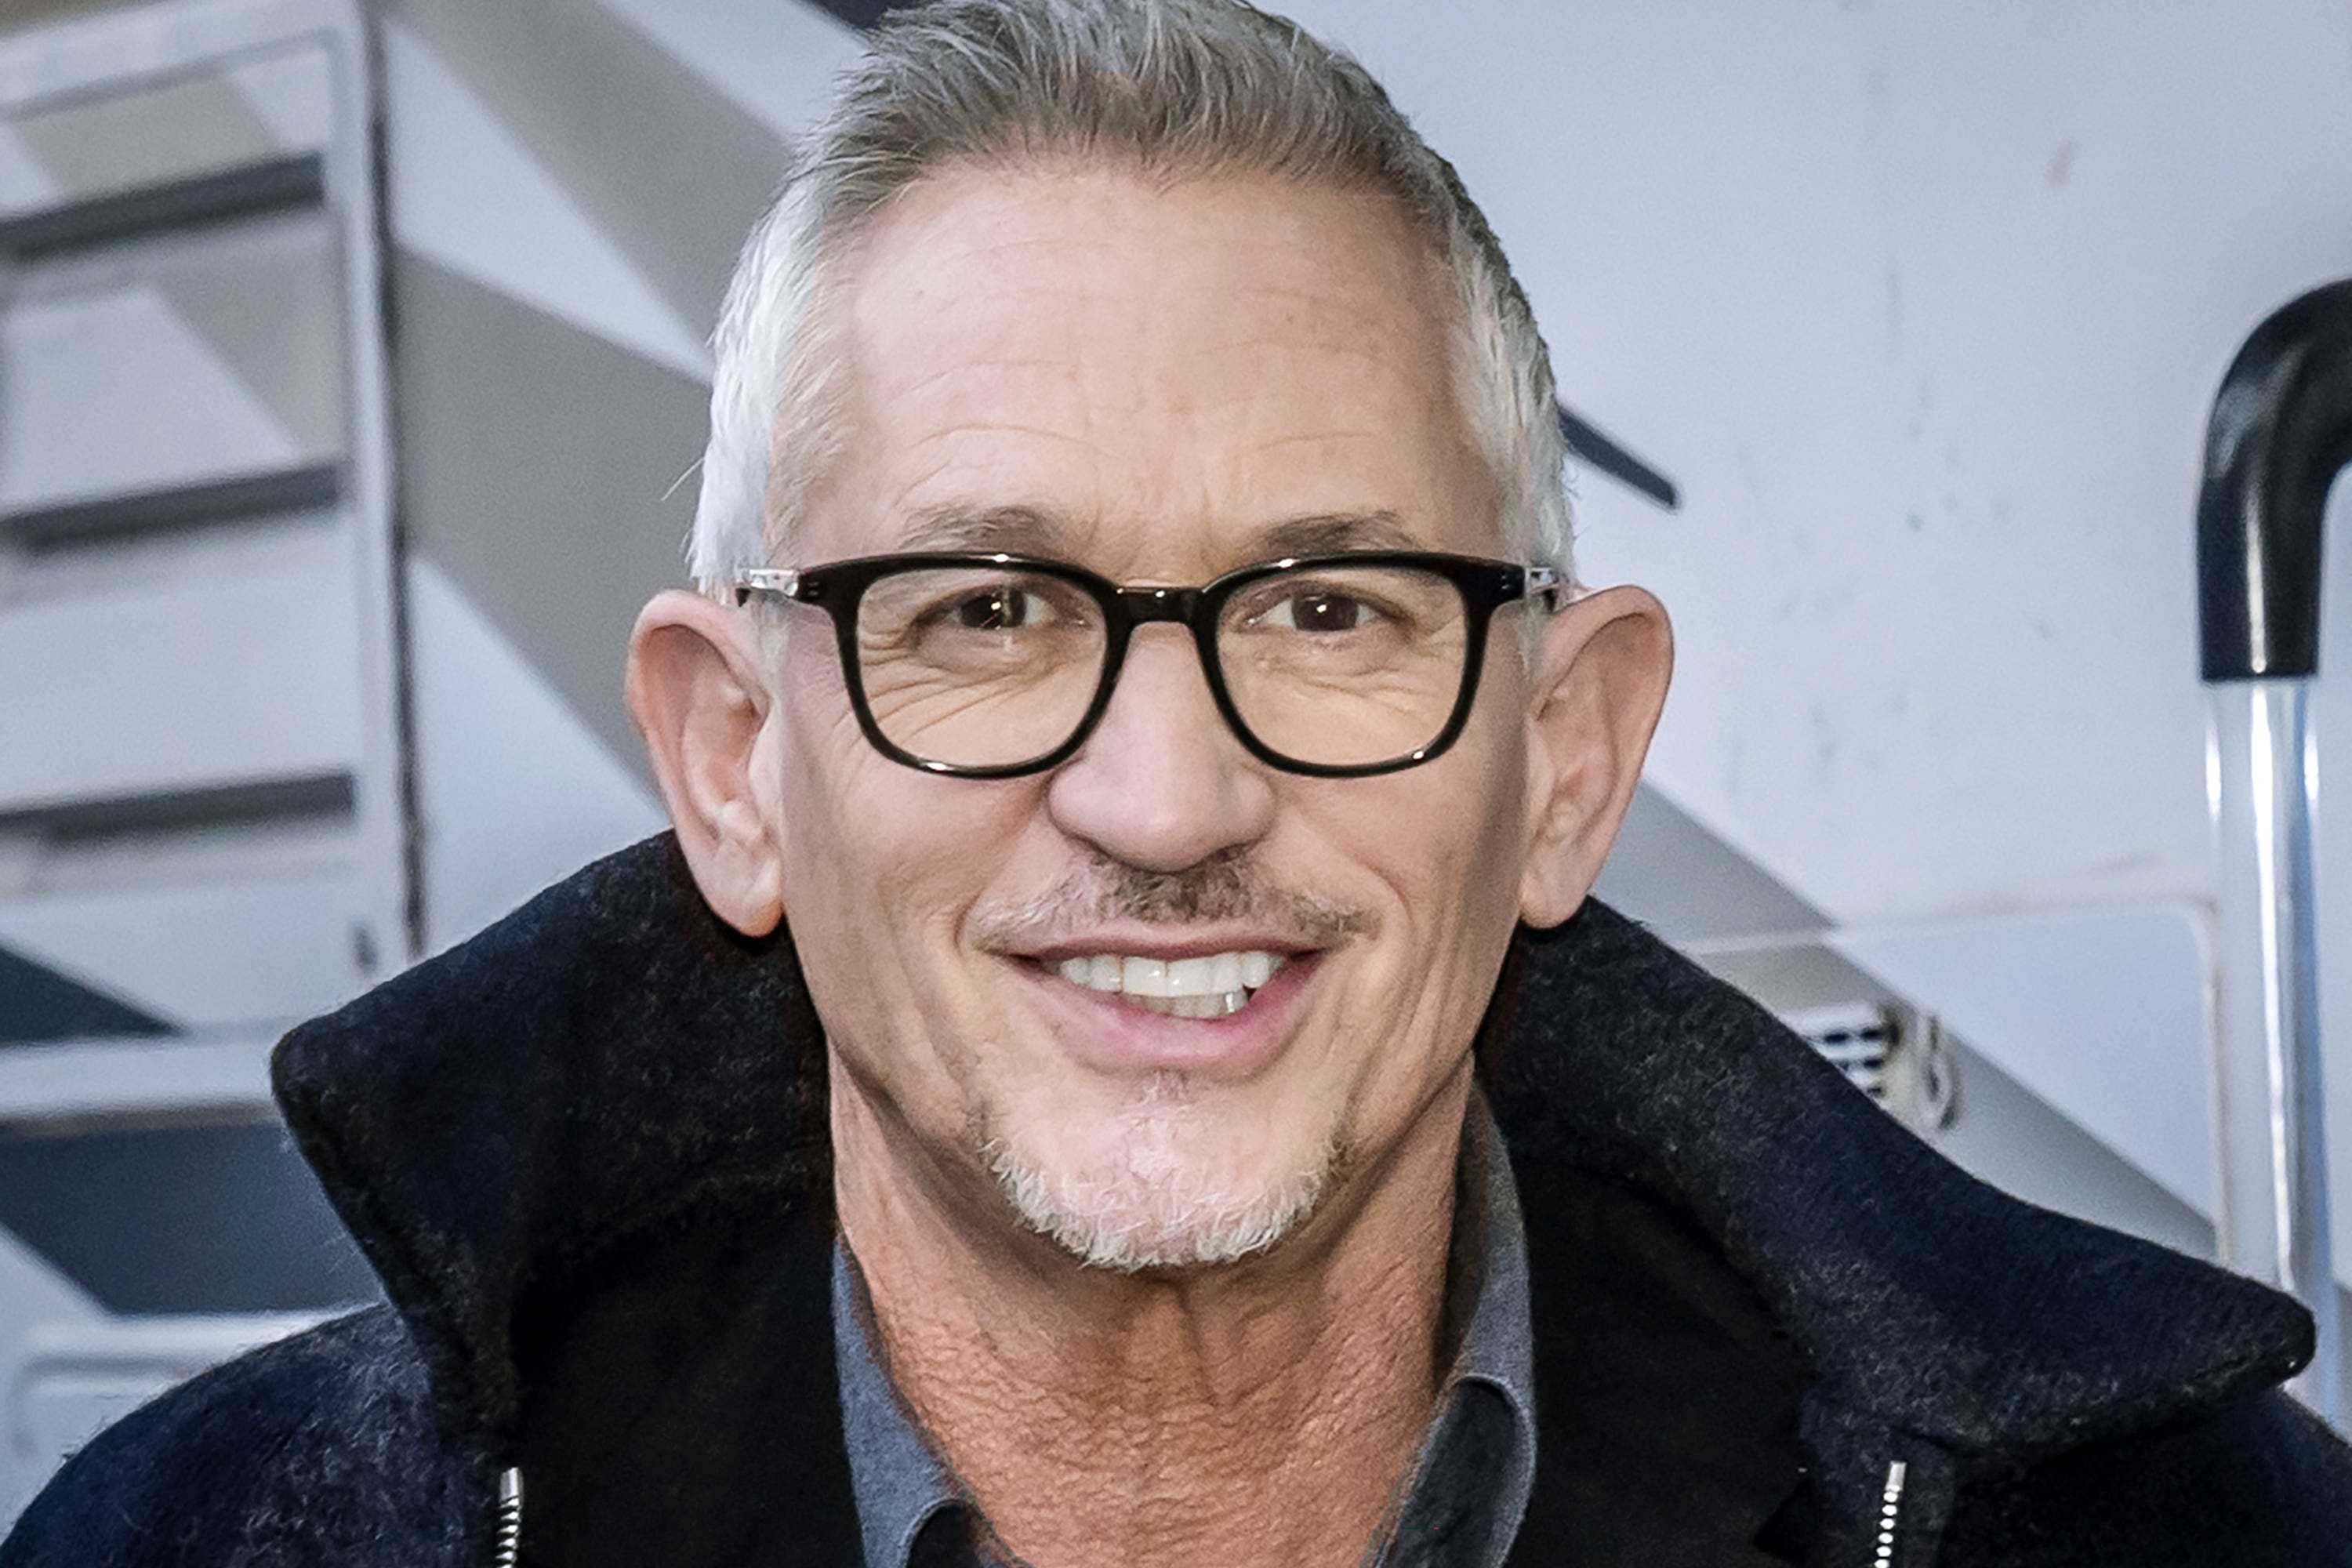 Gary Lineker will be at the Hay Festival Sports Day on 29 May